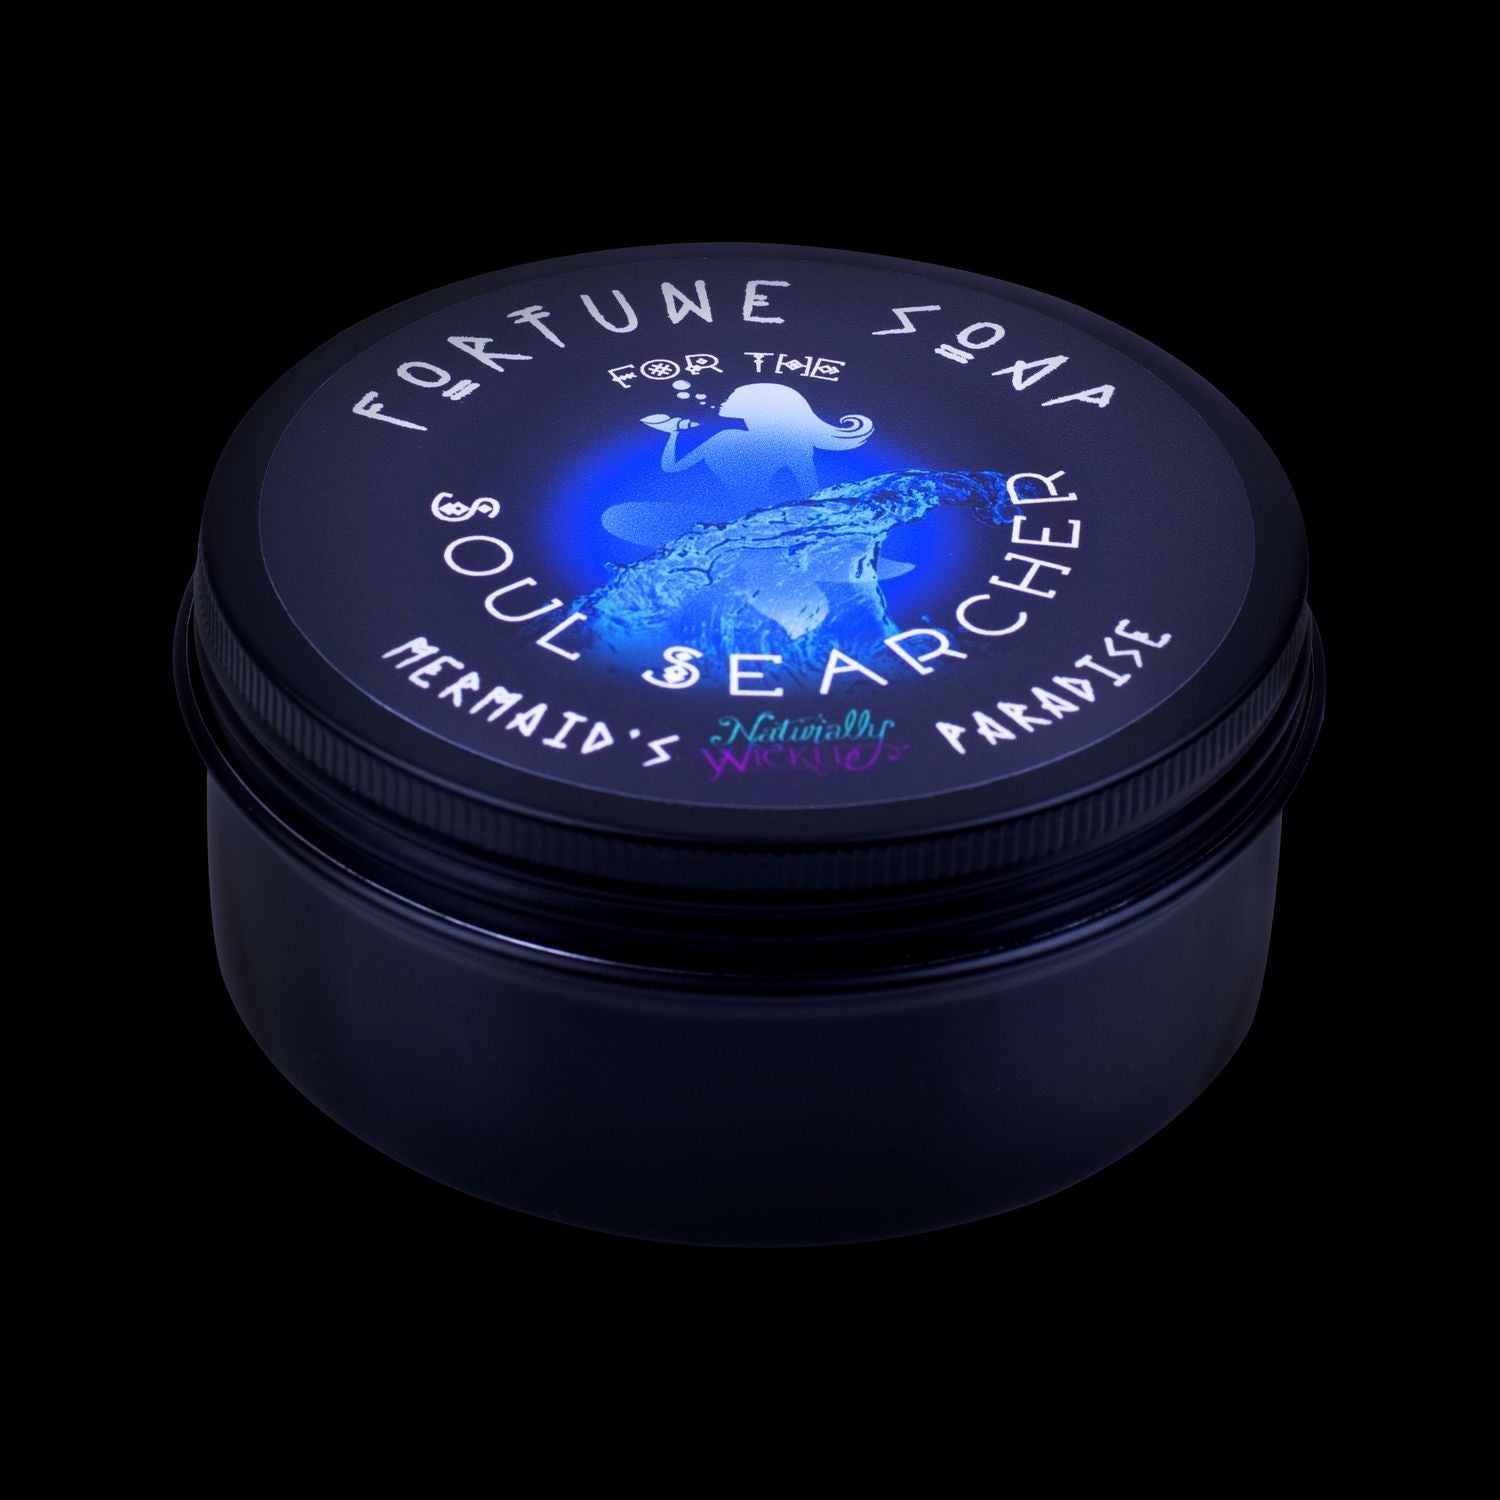 The Perfect Gift For A Soul Searcher. Naturally Wicked Fortune Soap For The Soul Searcher. Black Gloss Gift Tin Included